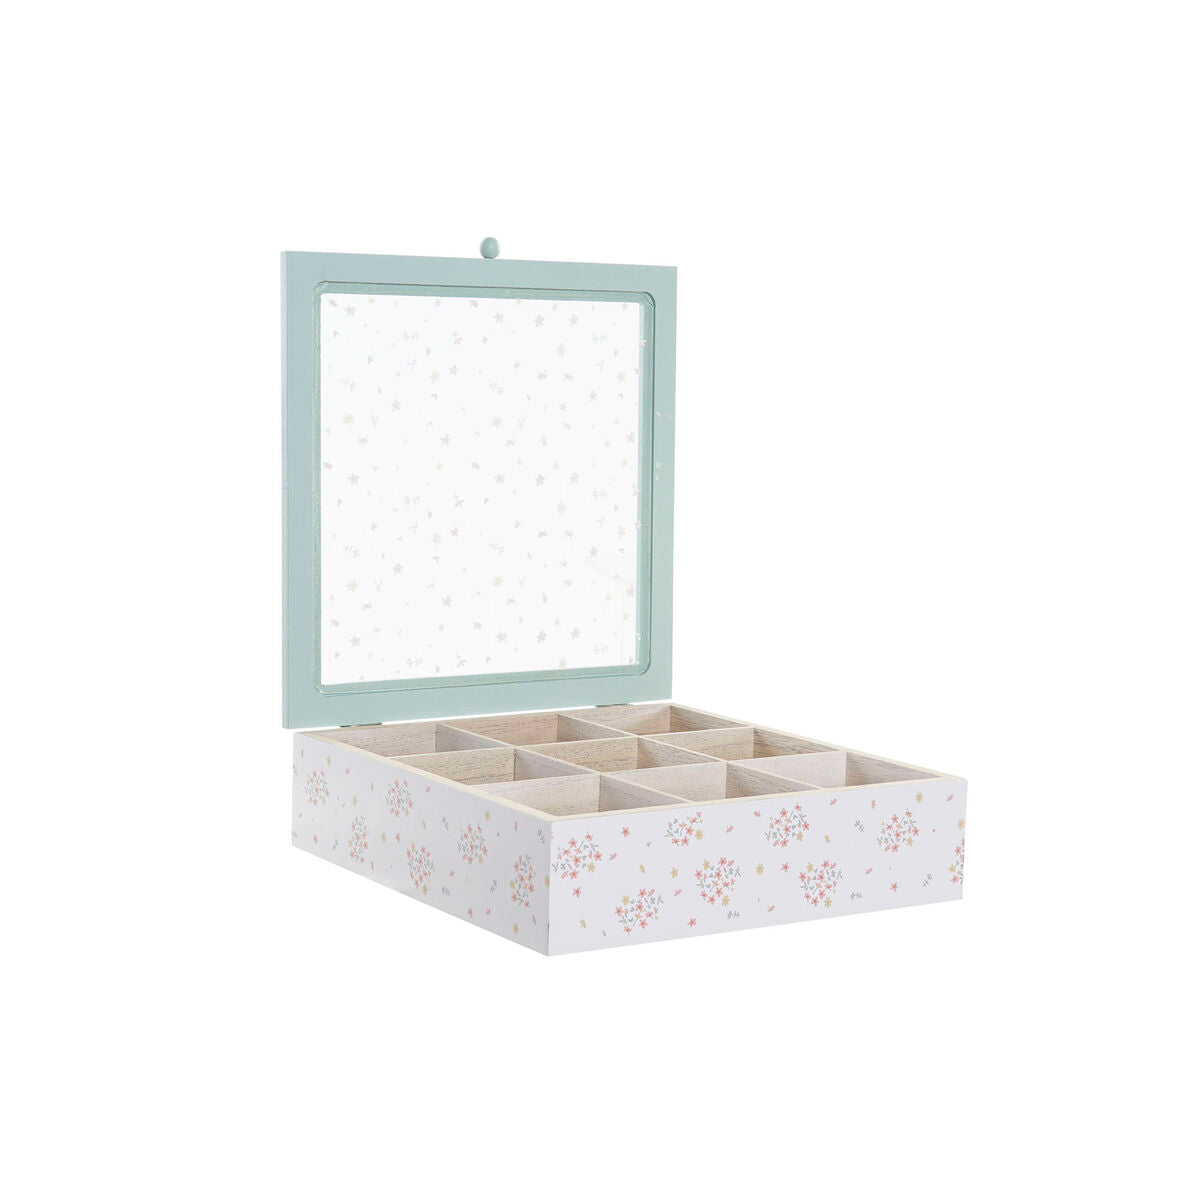 Box for Infusions DKD Home Decor Geel Rood Groen Metaal Kristal Hout MDF 3 Onderdelen 24 x 24 x 7 cm